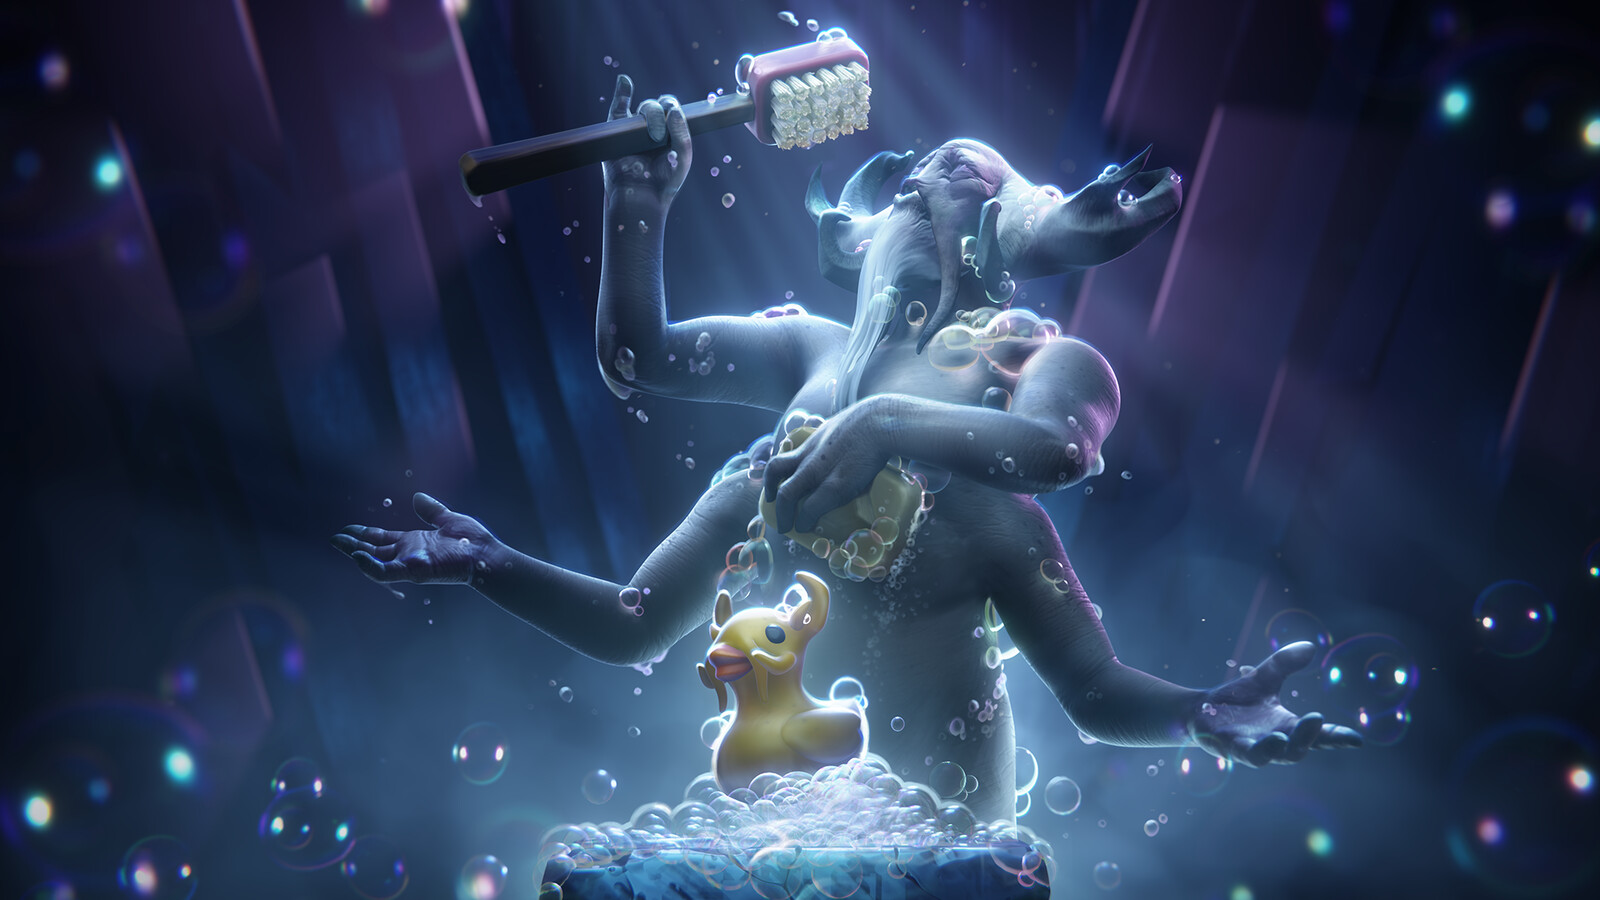 Bath-time Aghanim Loading Screen!
Body model, sculpt, and materials by Tim Brown Lees
Brush, Ducky, Soap, and Bubbles by me! 
Designed by Jackie Whisler
Additional Loading Screen bubbles by Ethan Simon-Law
Rigging and original head model by Valve